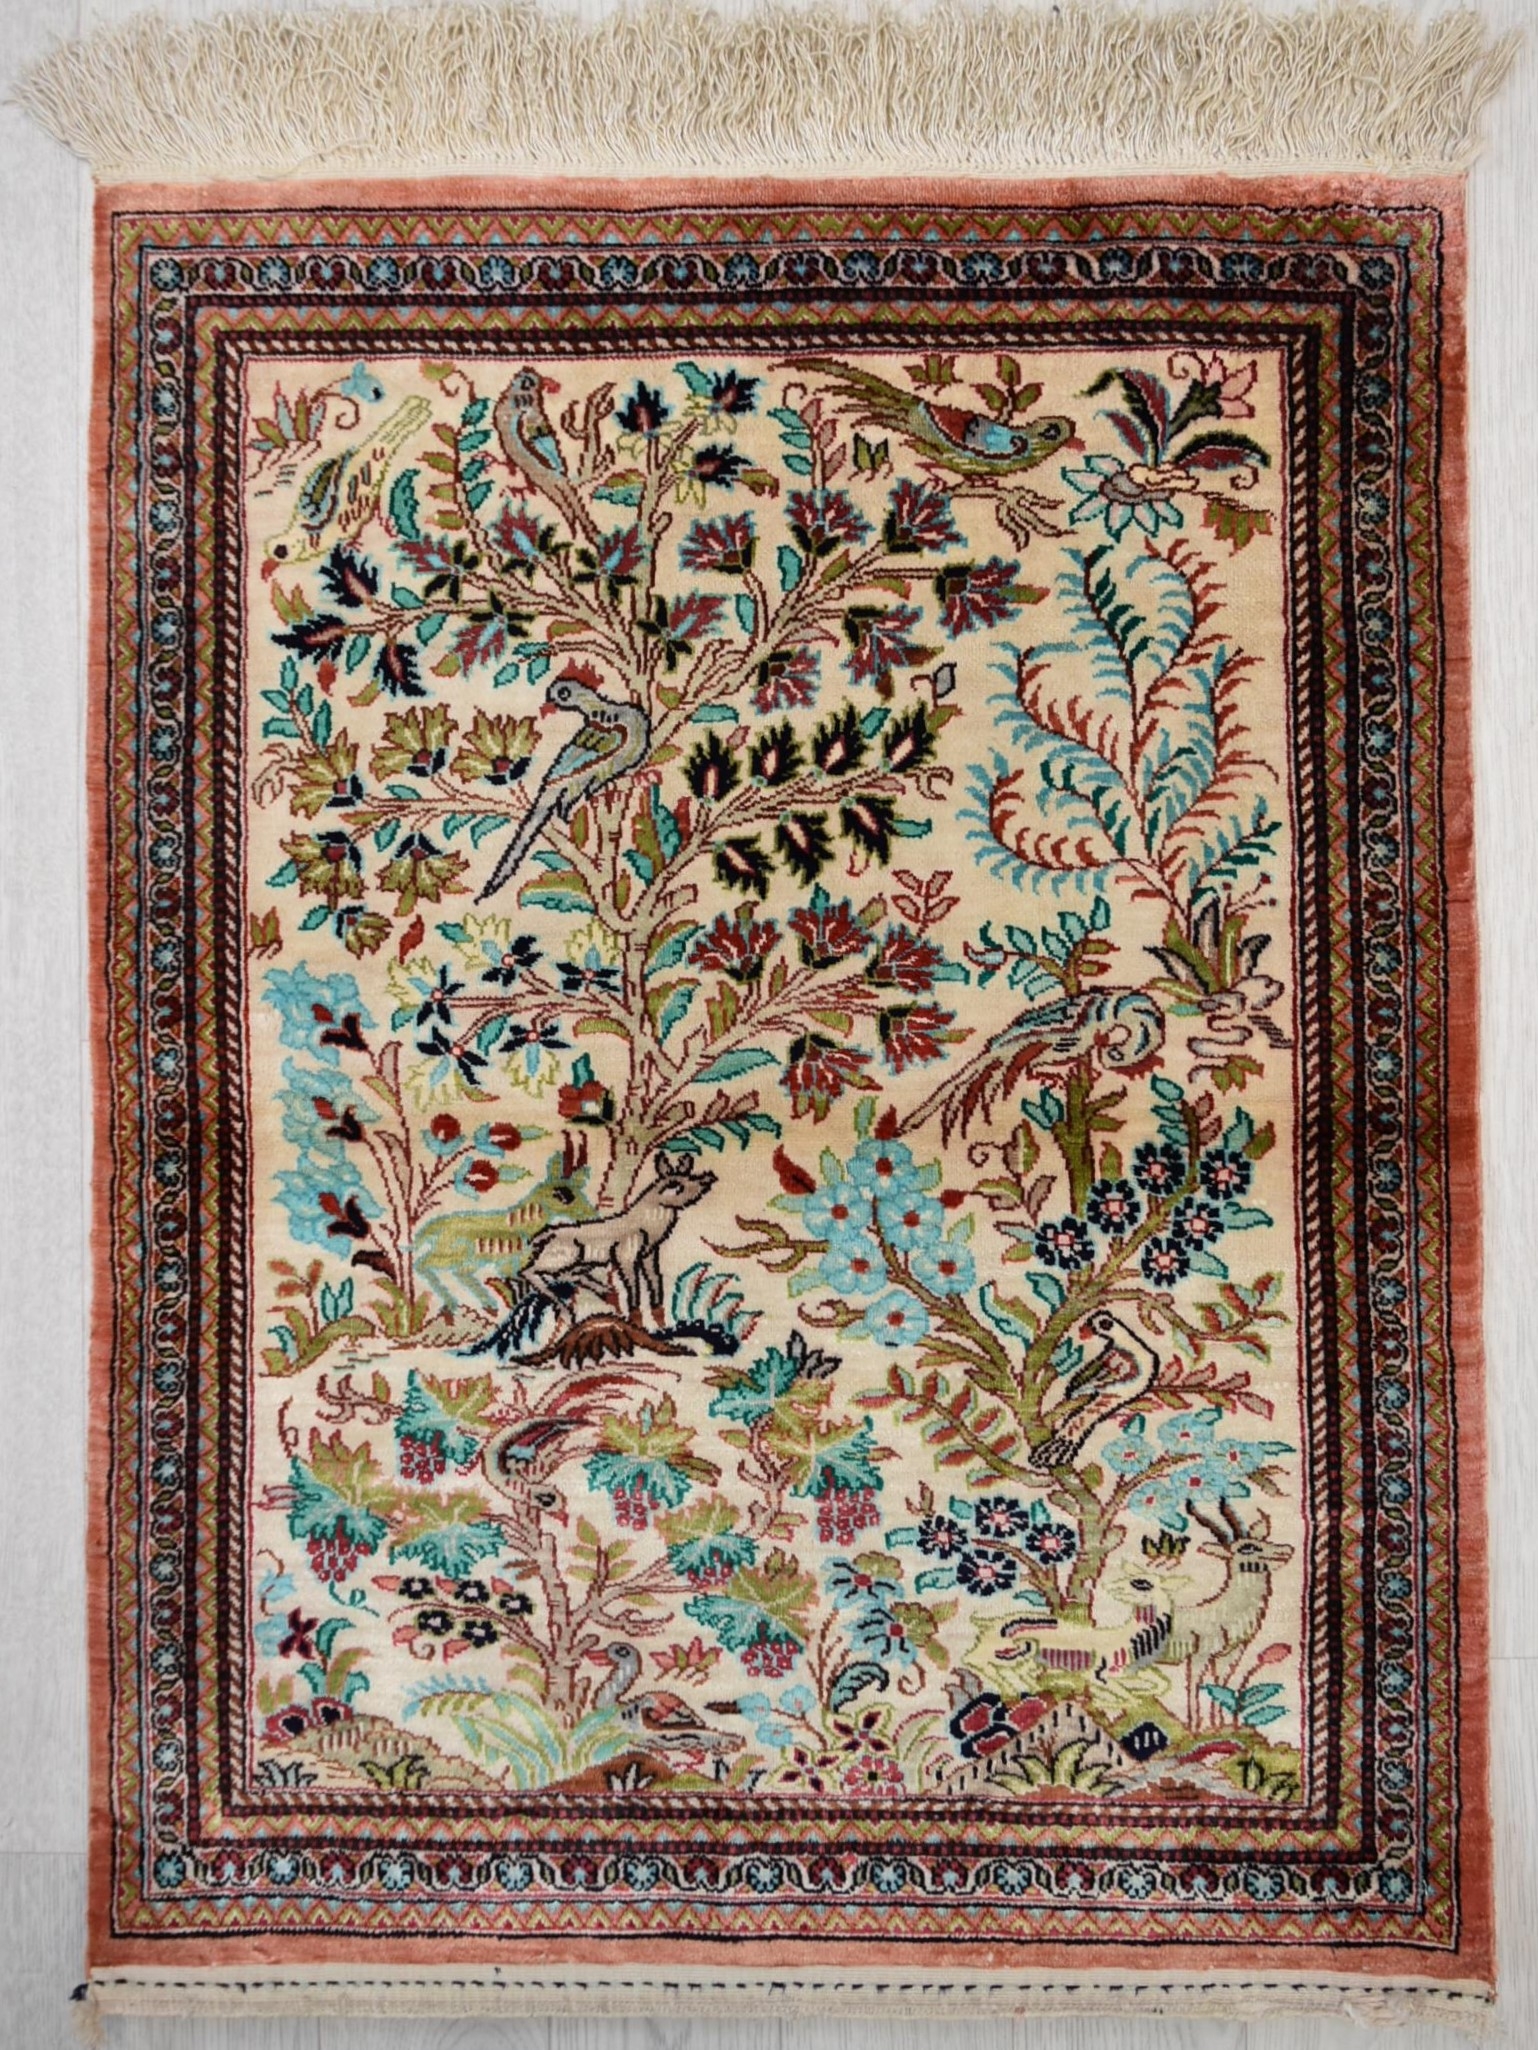 A Persian/Iranian silk Qum (Qom) rug, the central ivory field with tree of life and bird